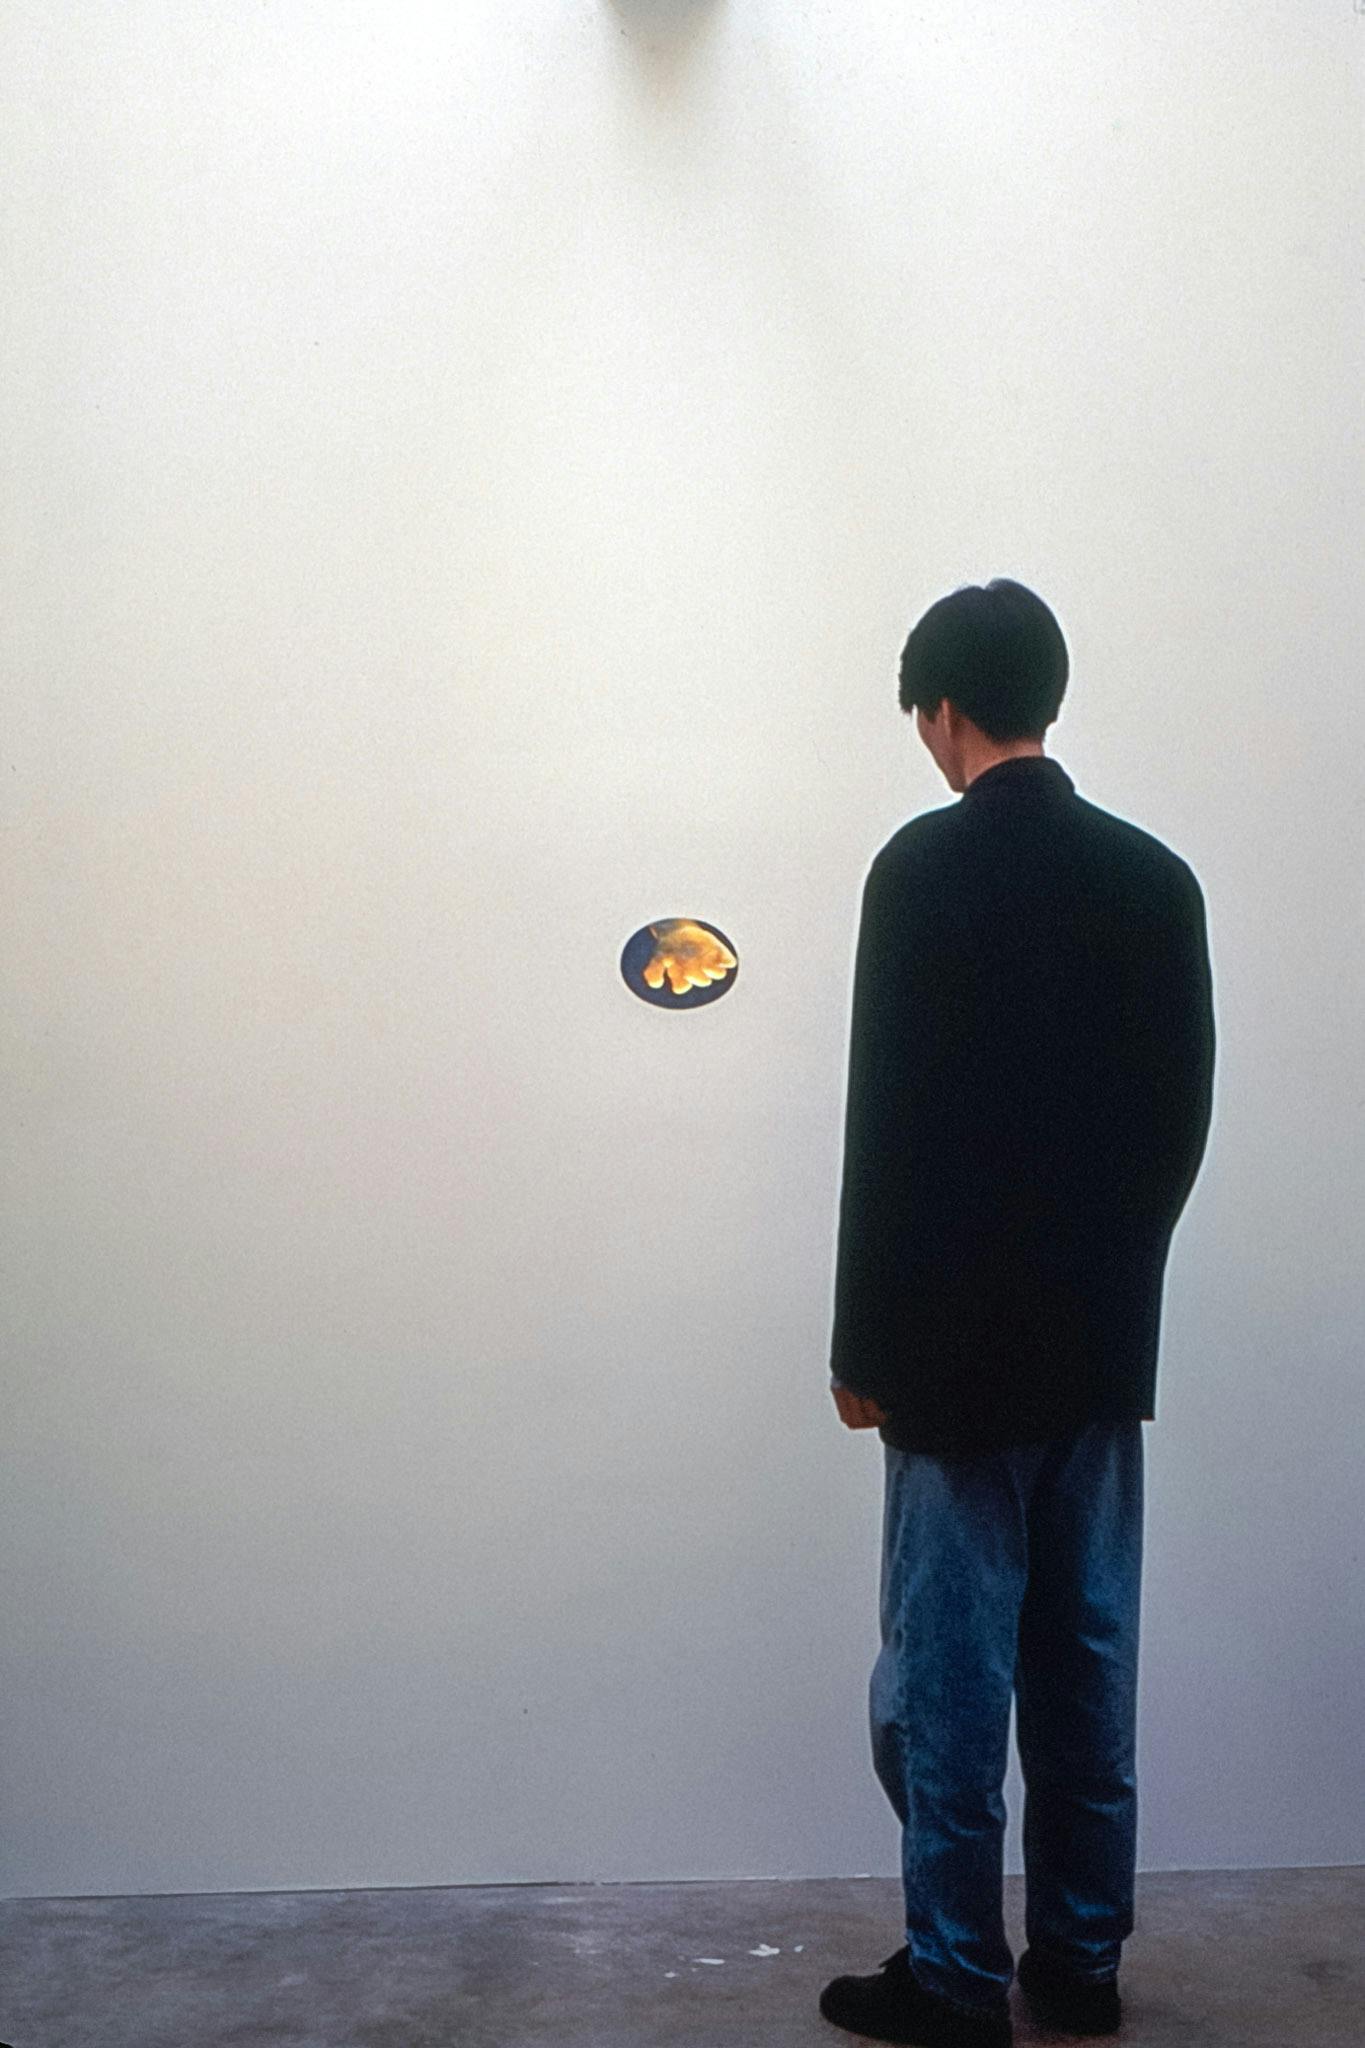 A man is looking at the artwork mounted on the gallery wall. The piece is flat and shaped in a small black oval resembling a hole. A photographed human hand is depicted in the middle of this hole.  